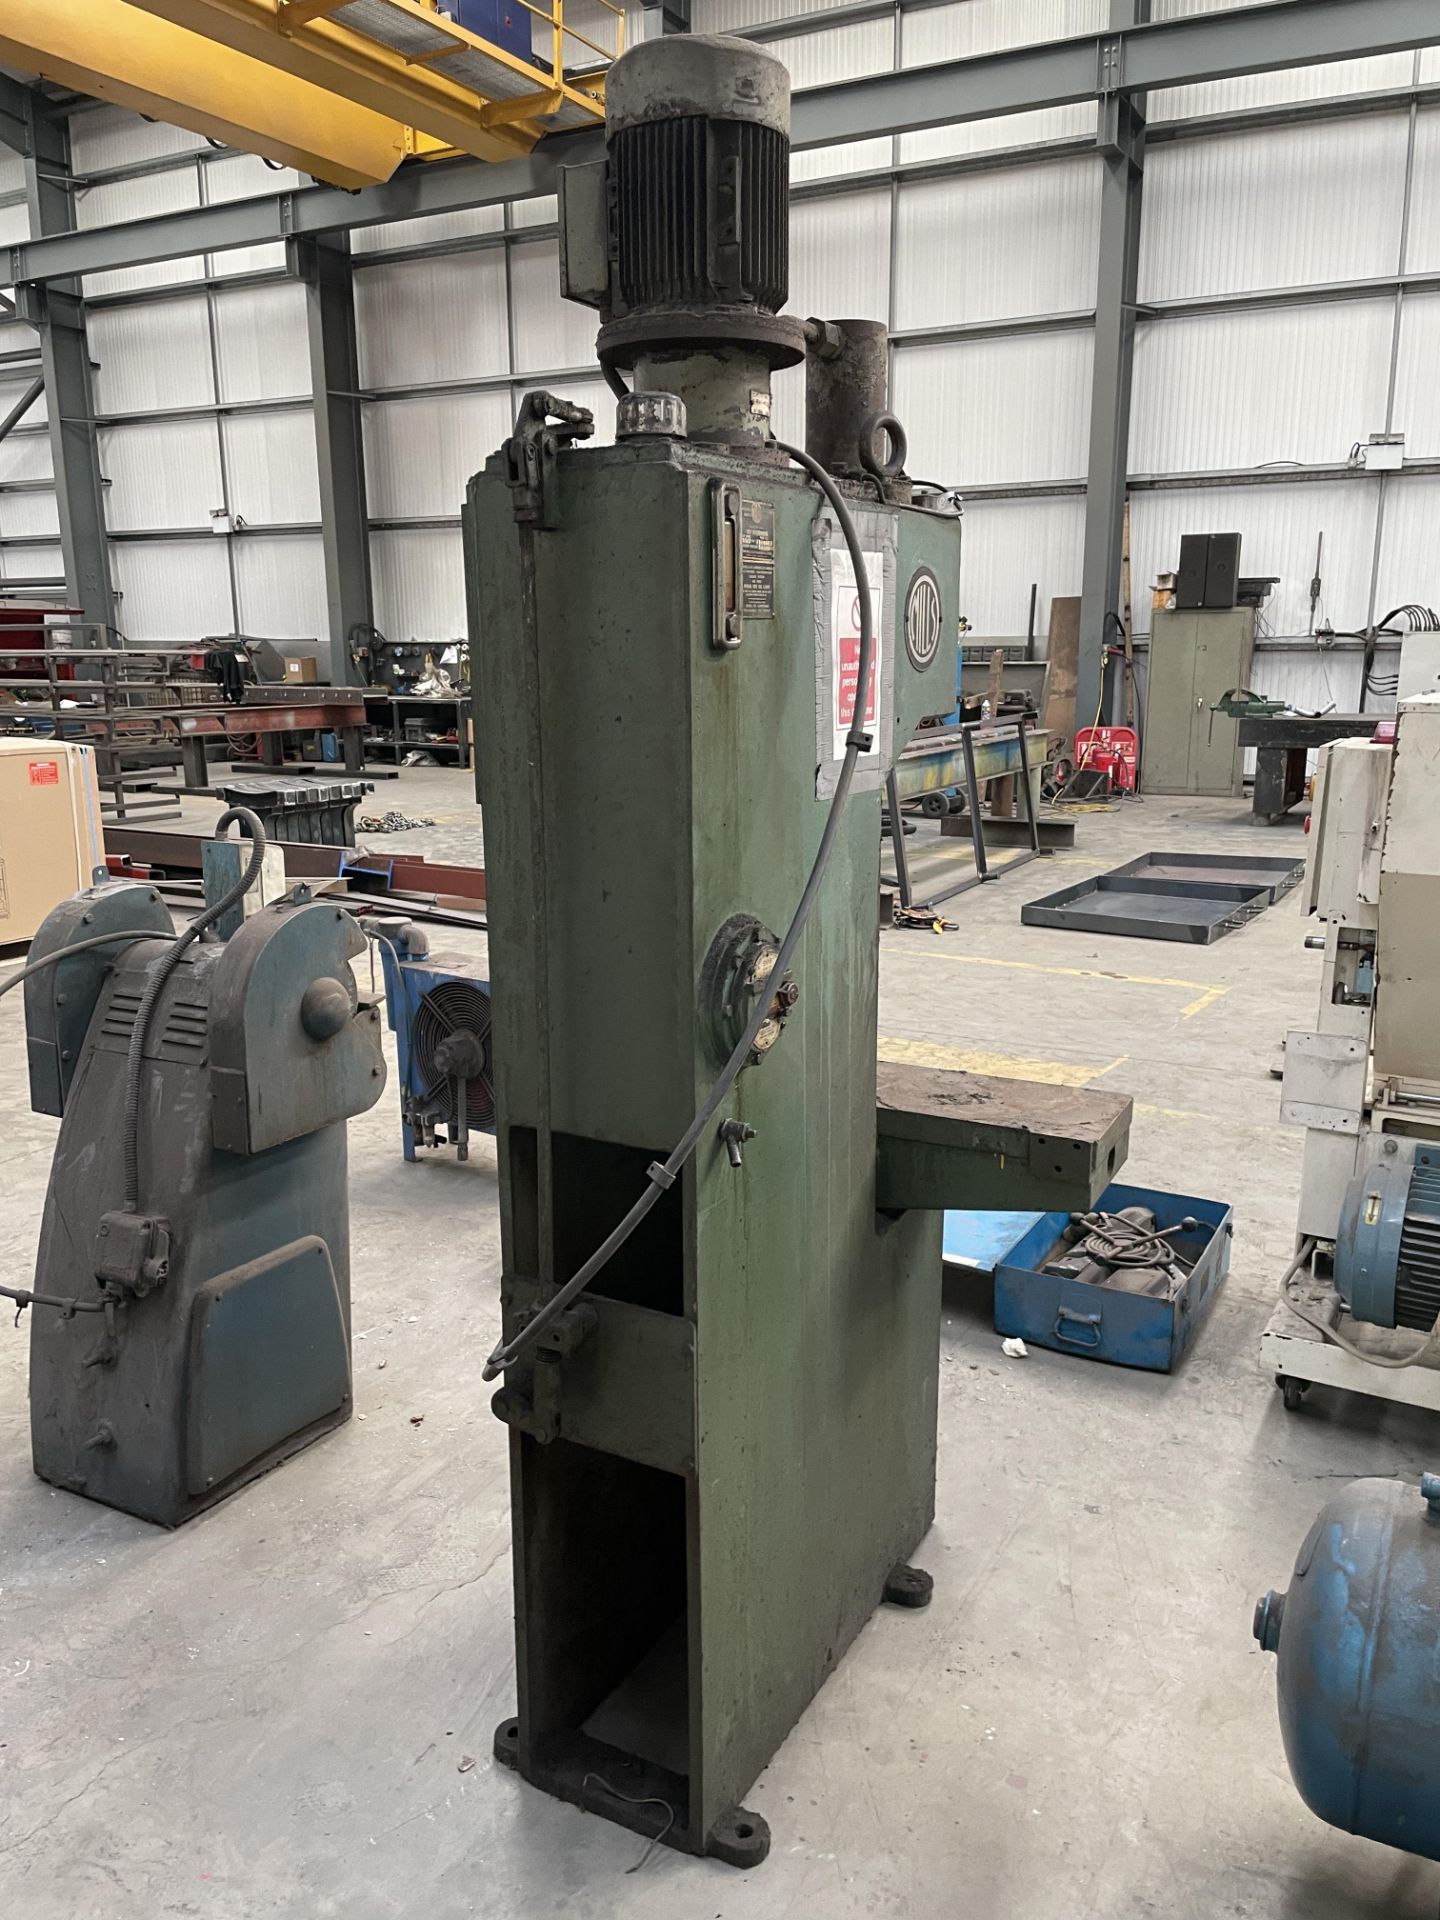 Mills Hydraulic Press, serial no. 52071, with table approx. 910mm x 250mm, lot located at Ocean - Bild 3 aus 4